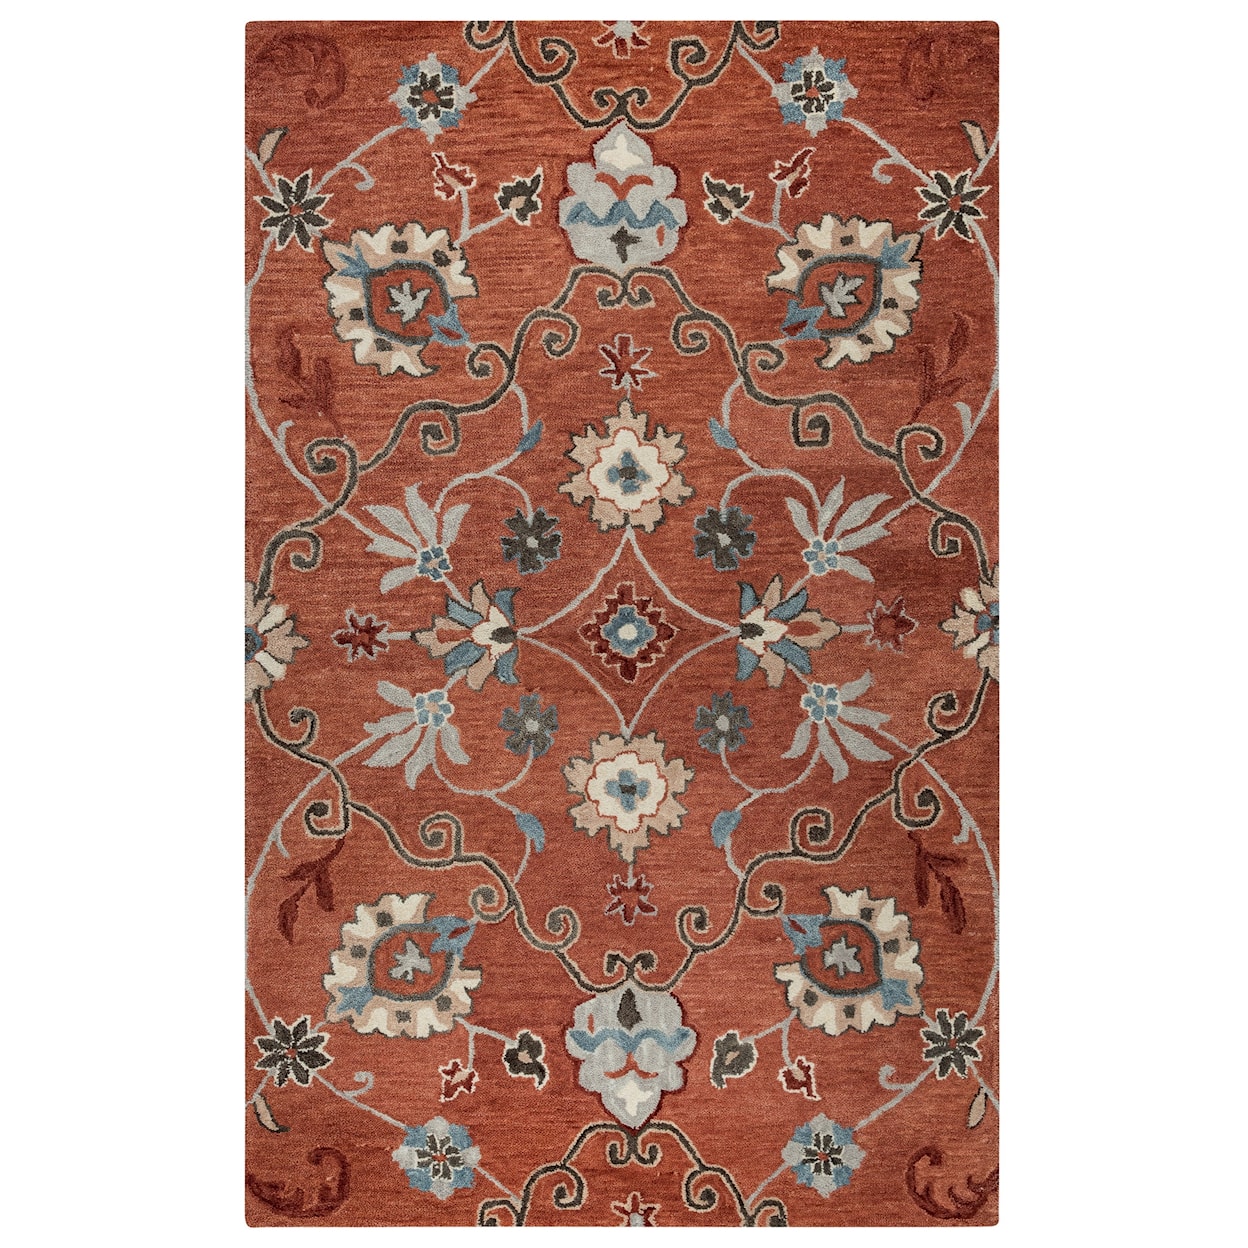 Rizzy Home Leone 2' x 3' Rectangle Rug